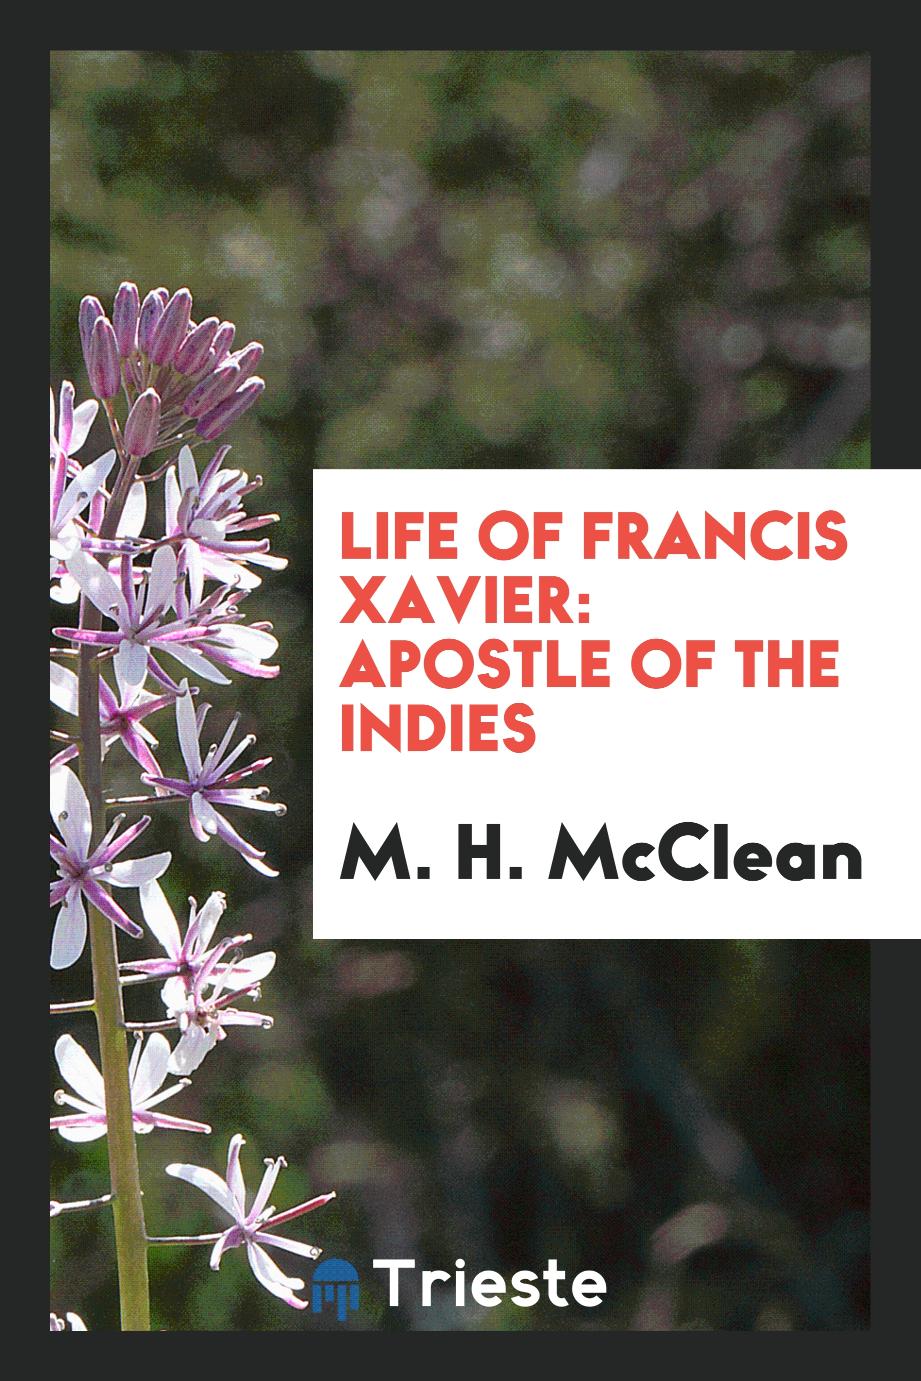 M. H. McClean - Life of Francis Xavier: apostle of the Indies